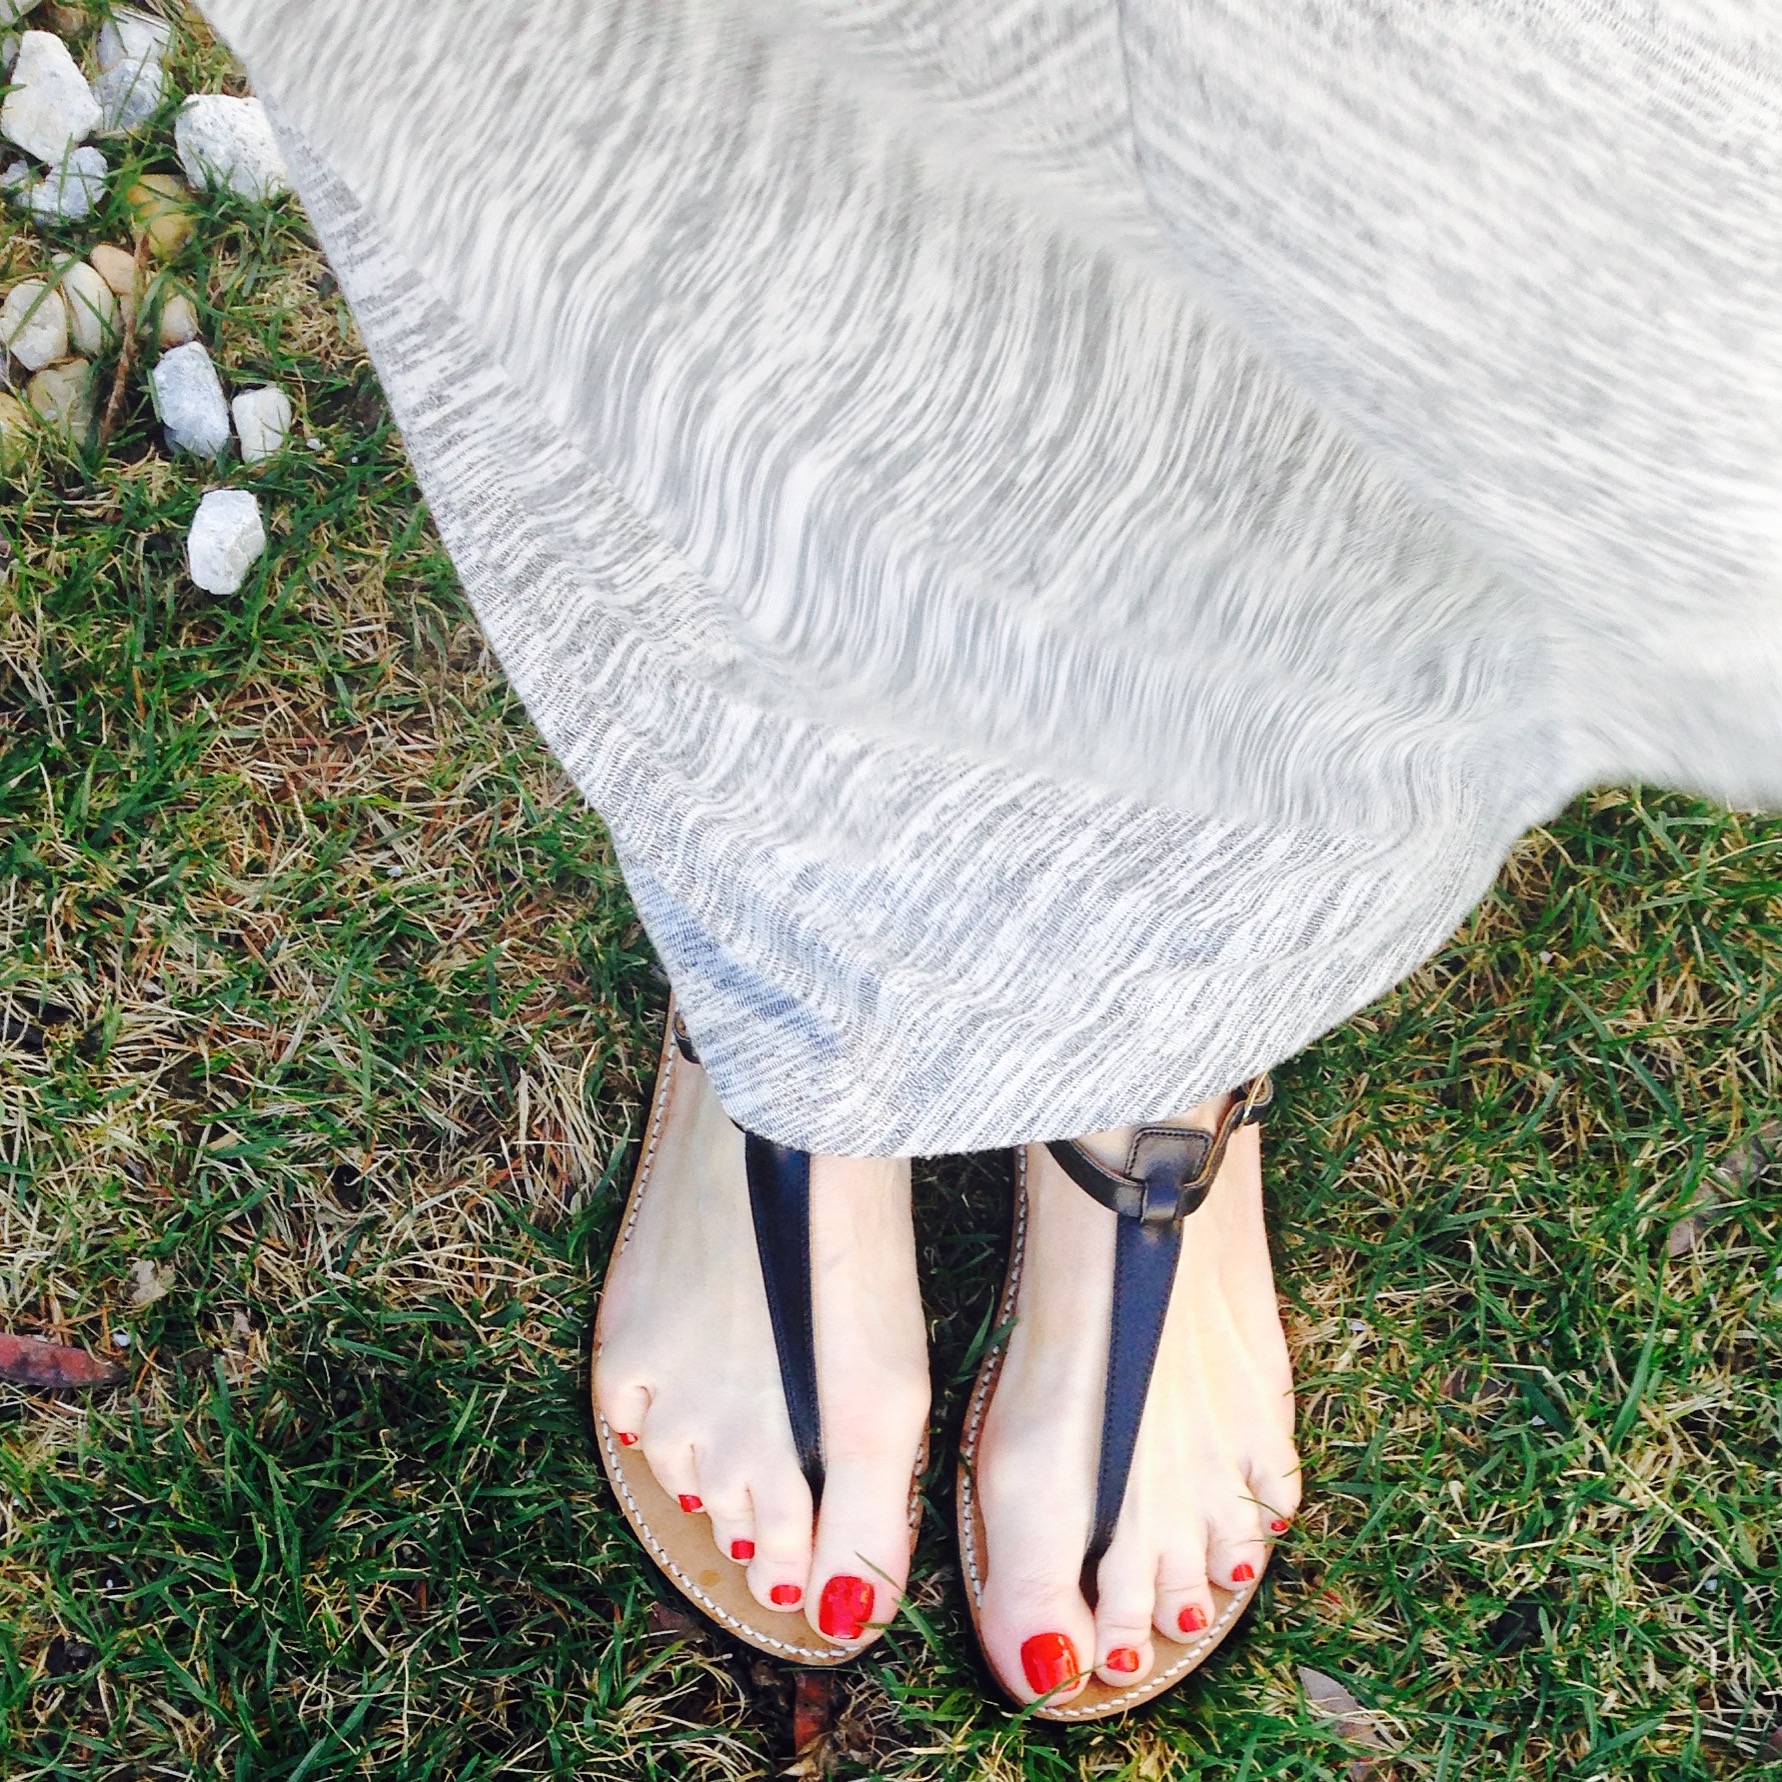 Loft lou and gray rondini sandals